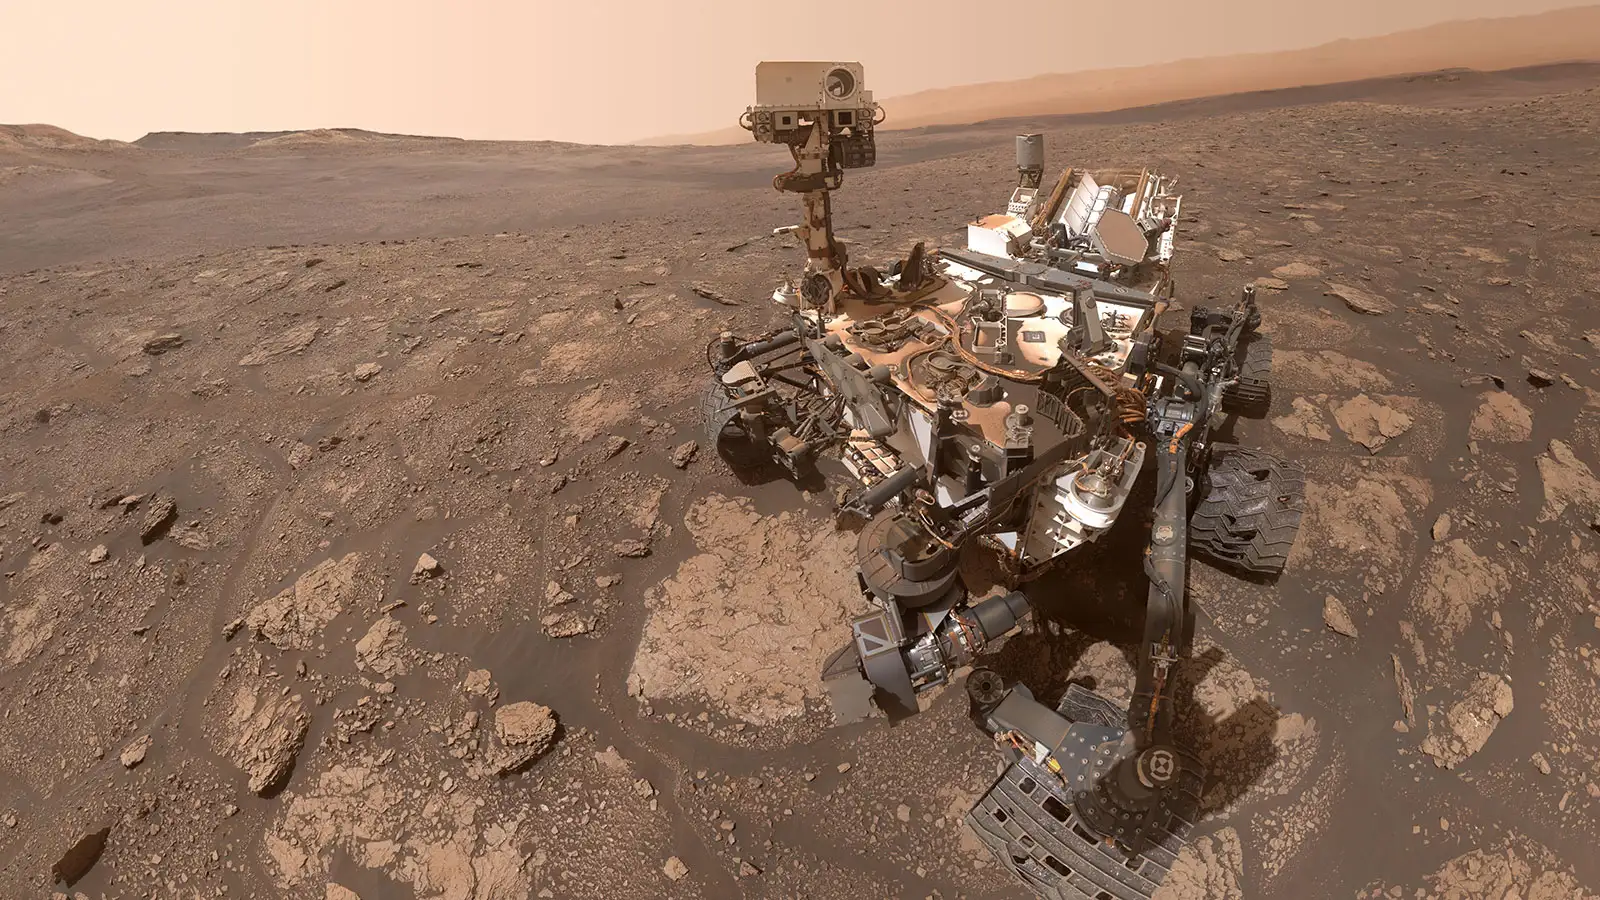 Curiosity’s Selfie at the ‘Mary Anning’ Location on Mars, courtesy of NASA/JPL-Caltech/MSSS.